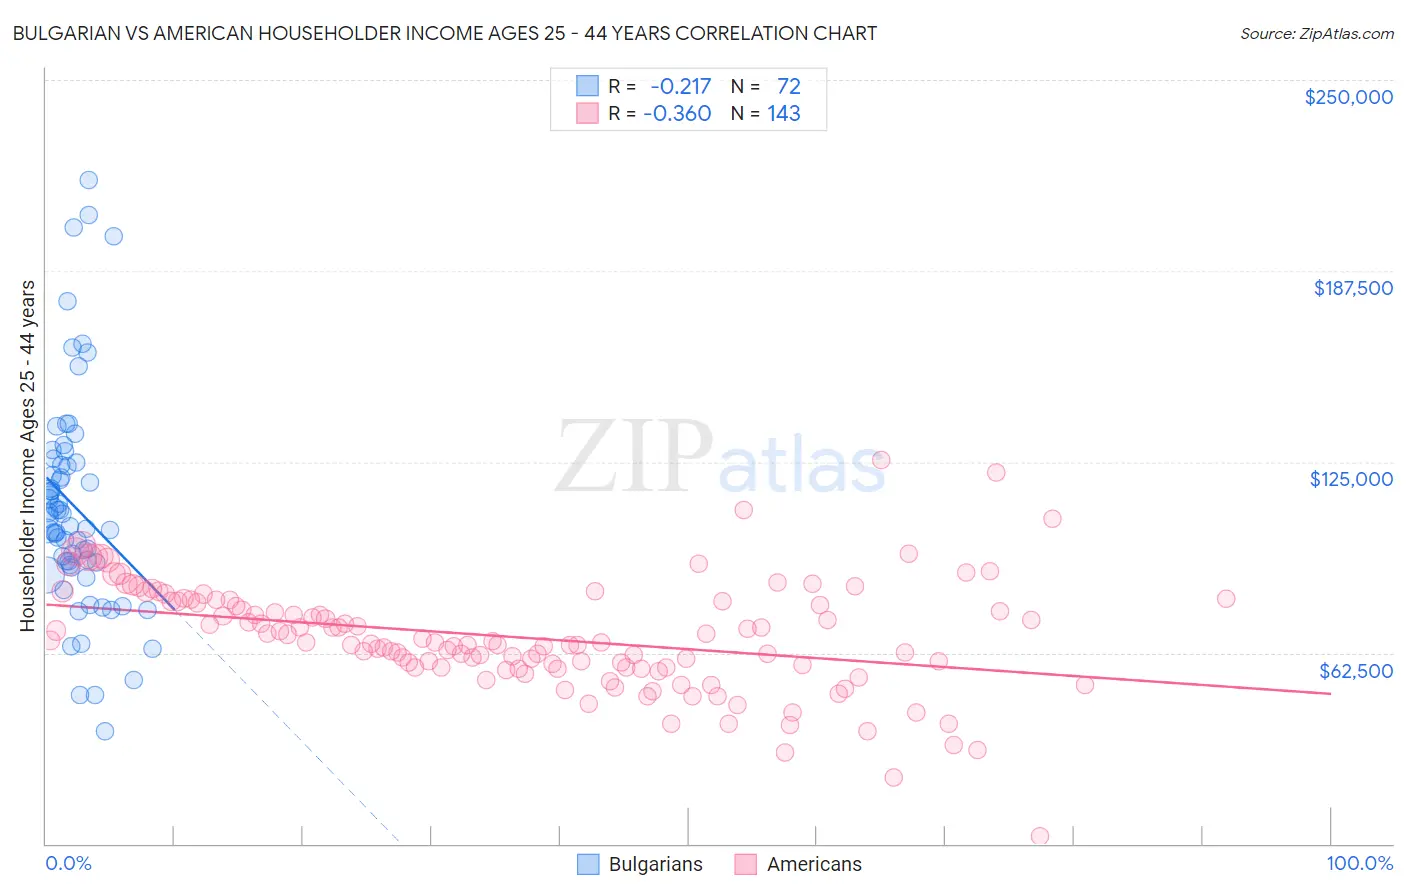 Bulgarian vs American Householder Income Ages 25 - 44 years